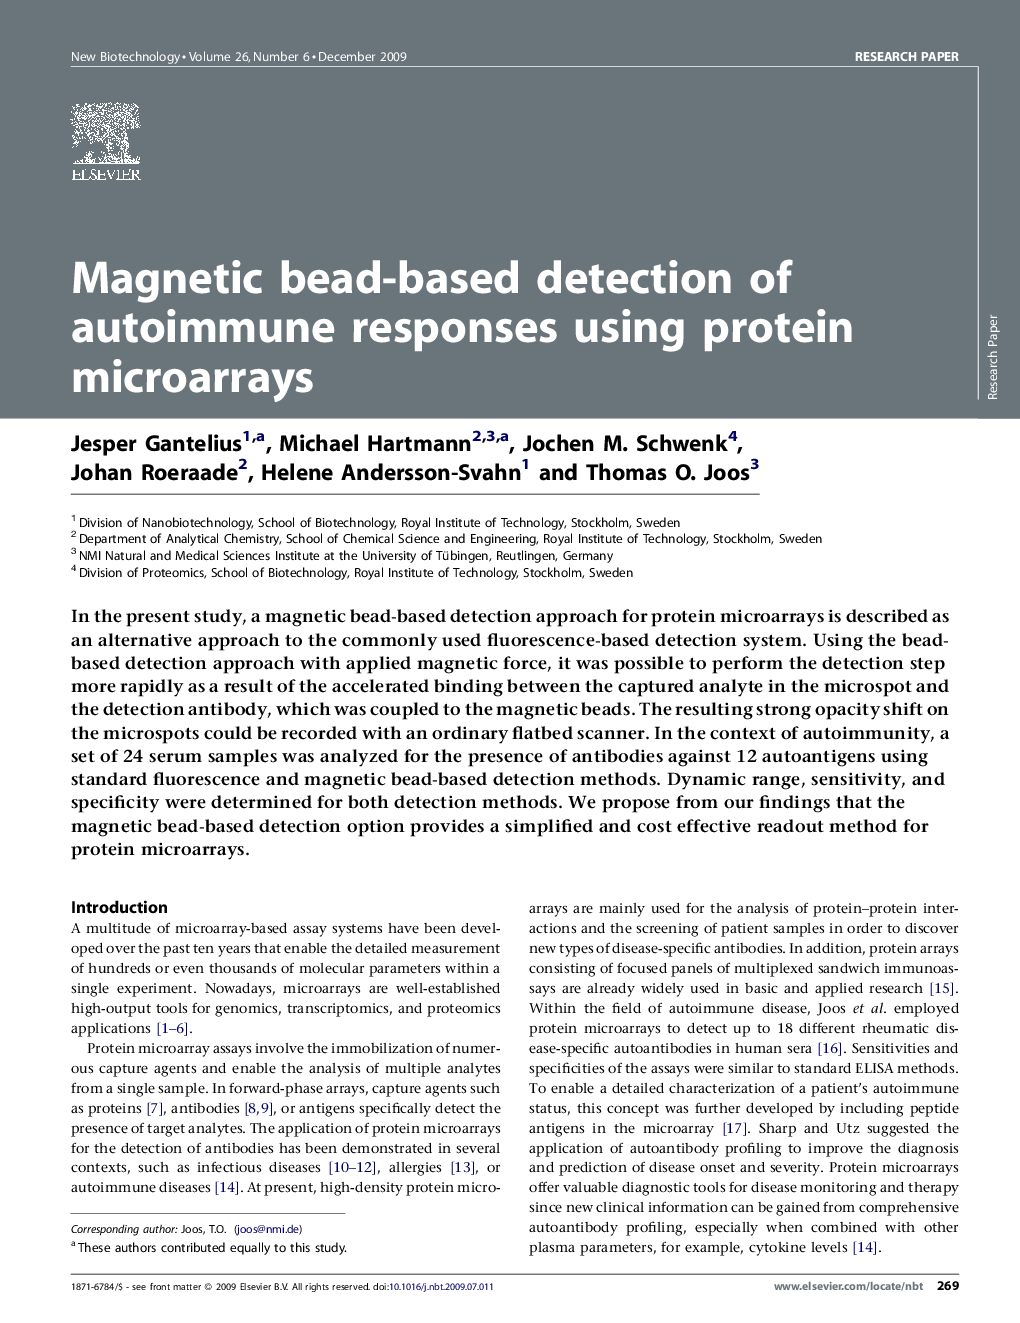 Magnetic bead-based detection of autoimmune responses using protein microarrays